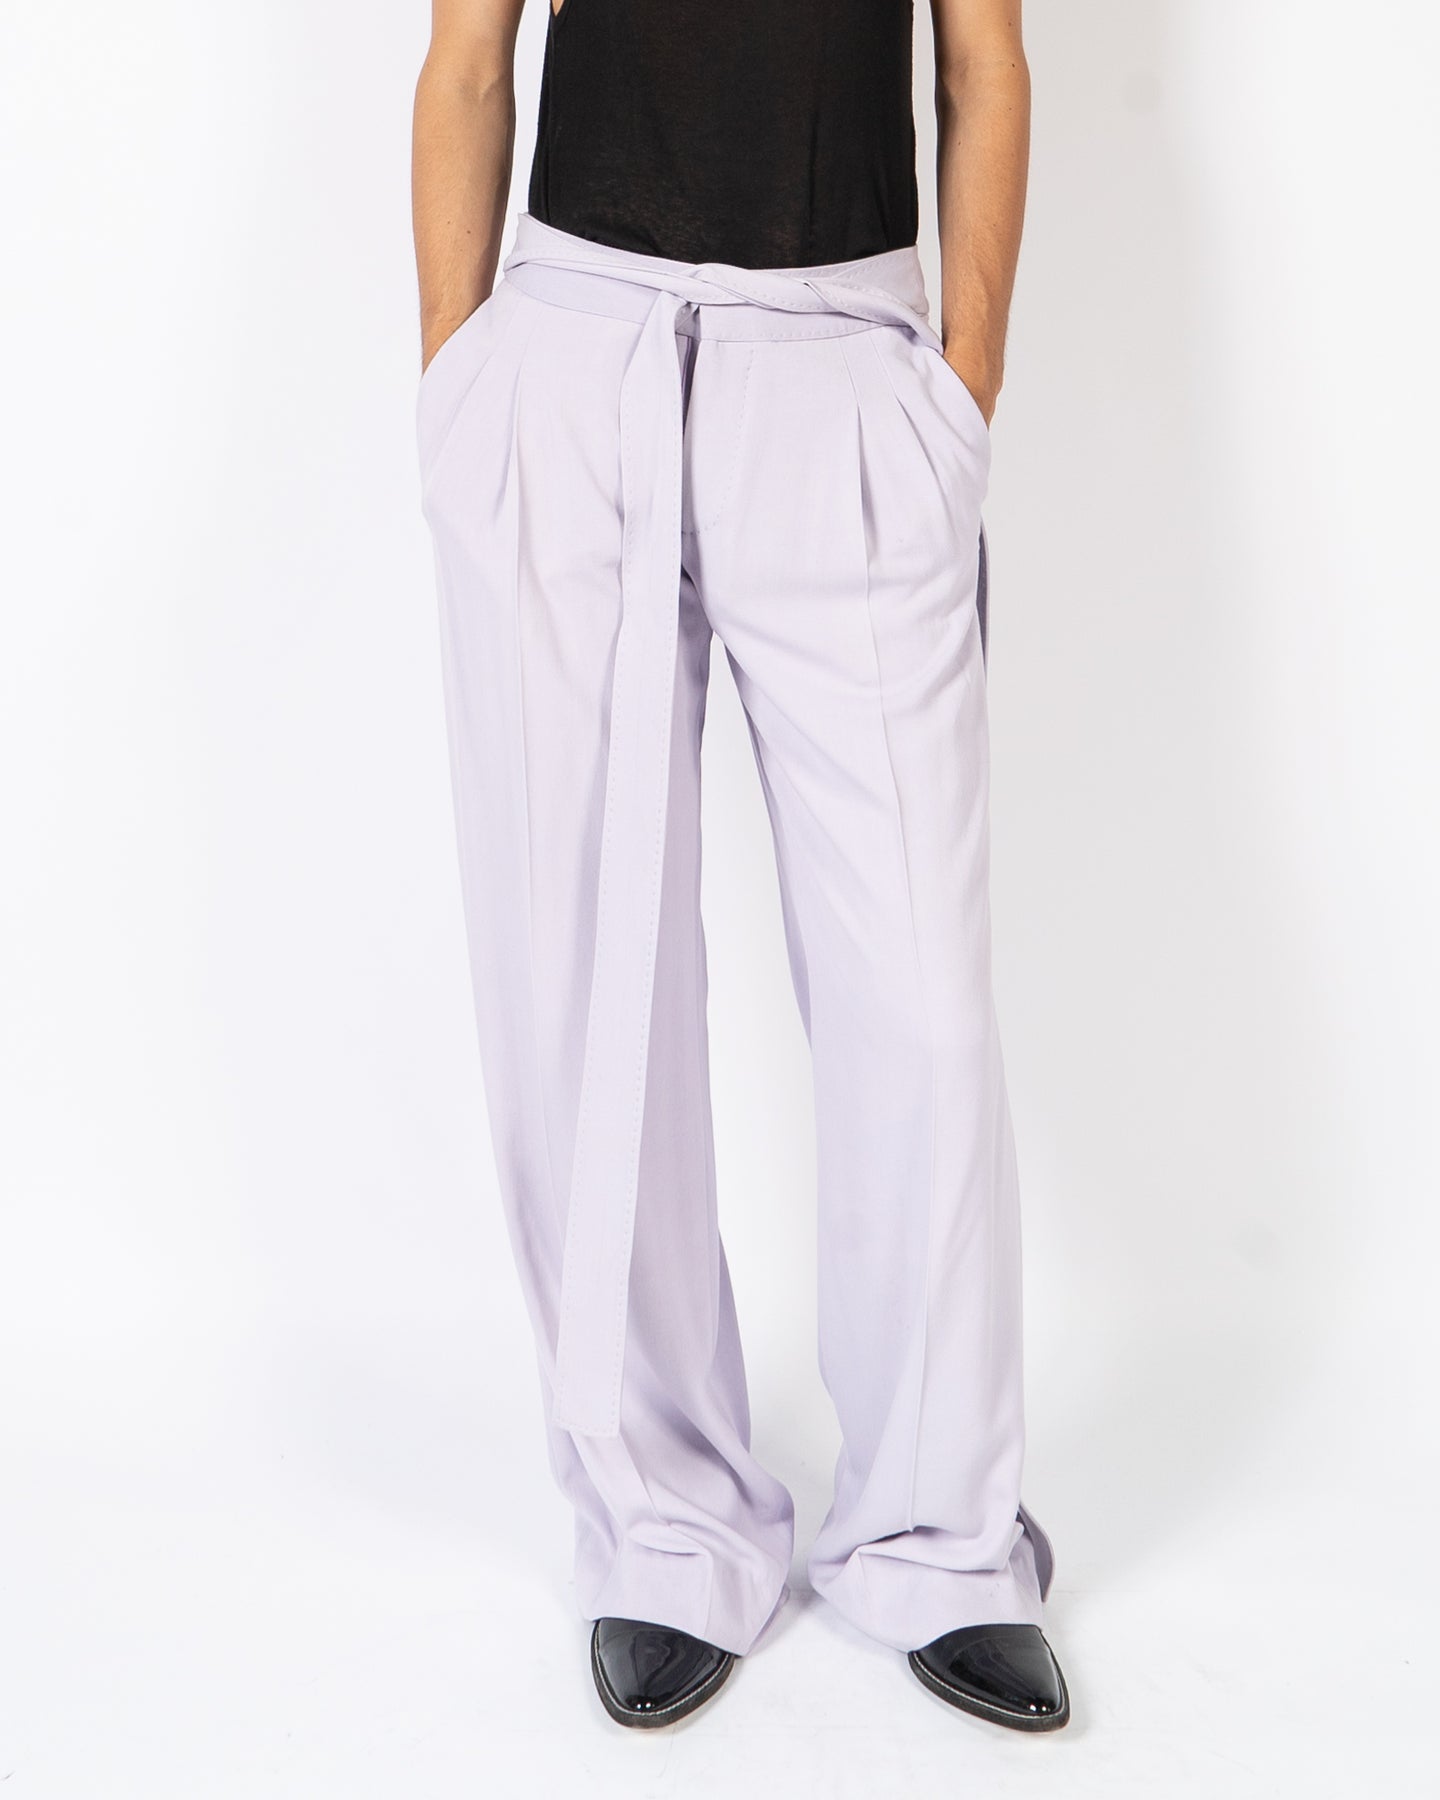 SS19 Lilac Belted Wool Trousers